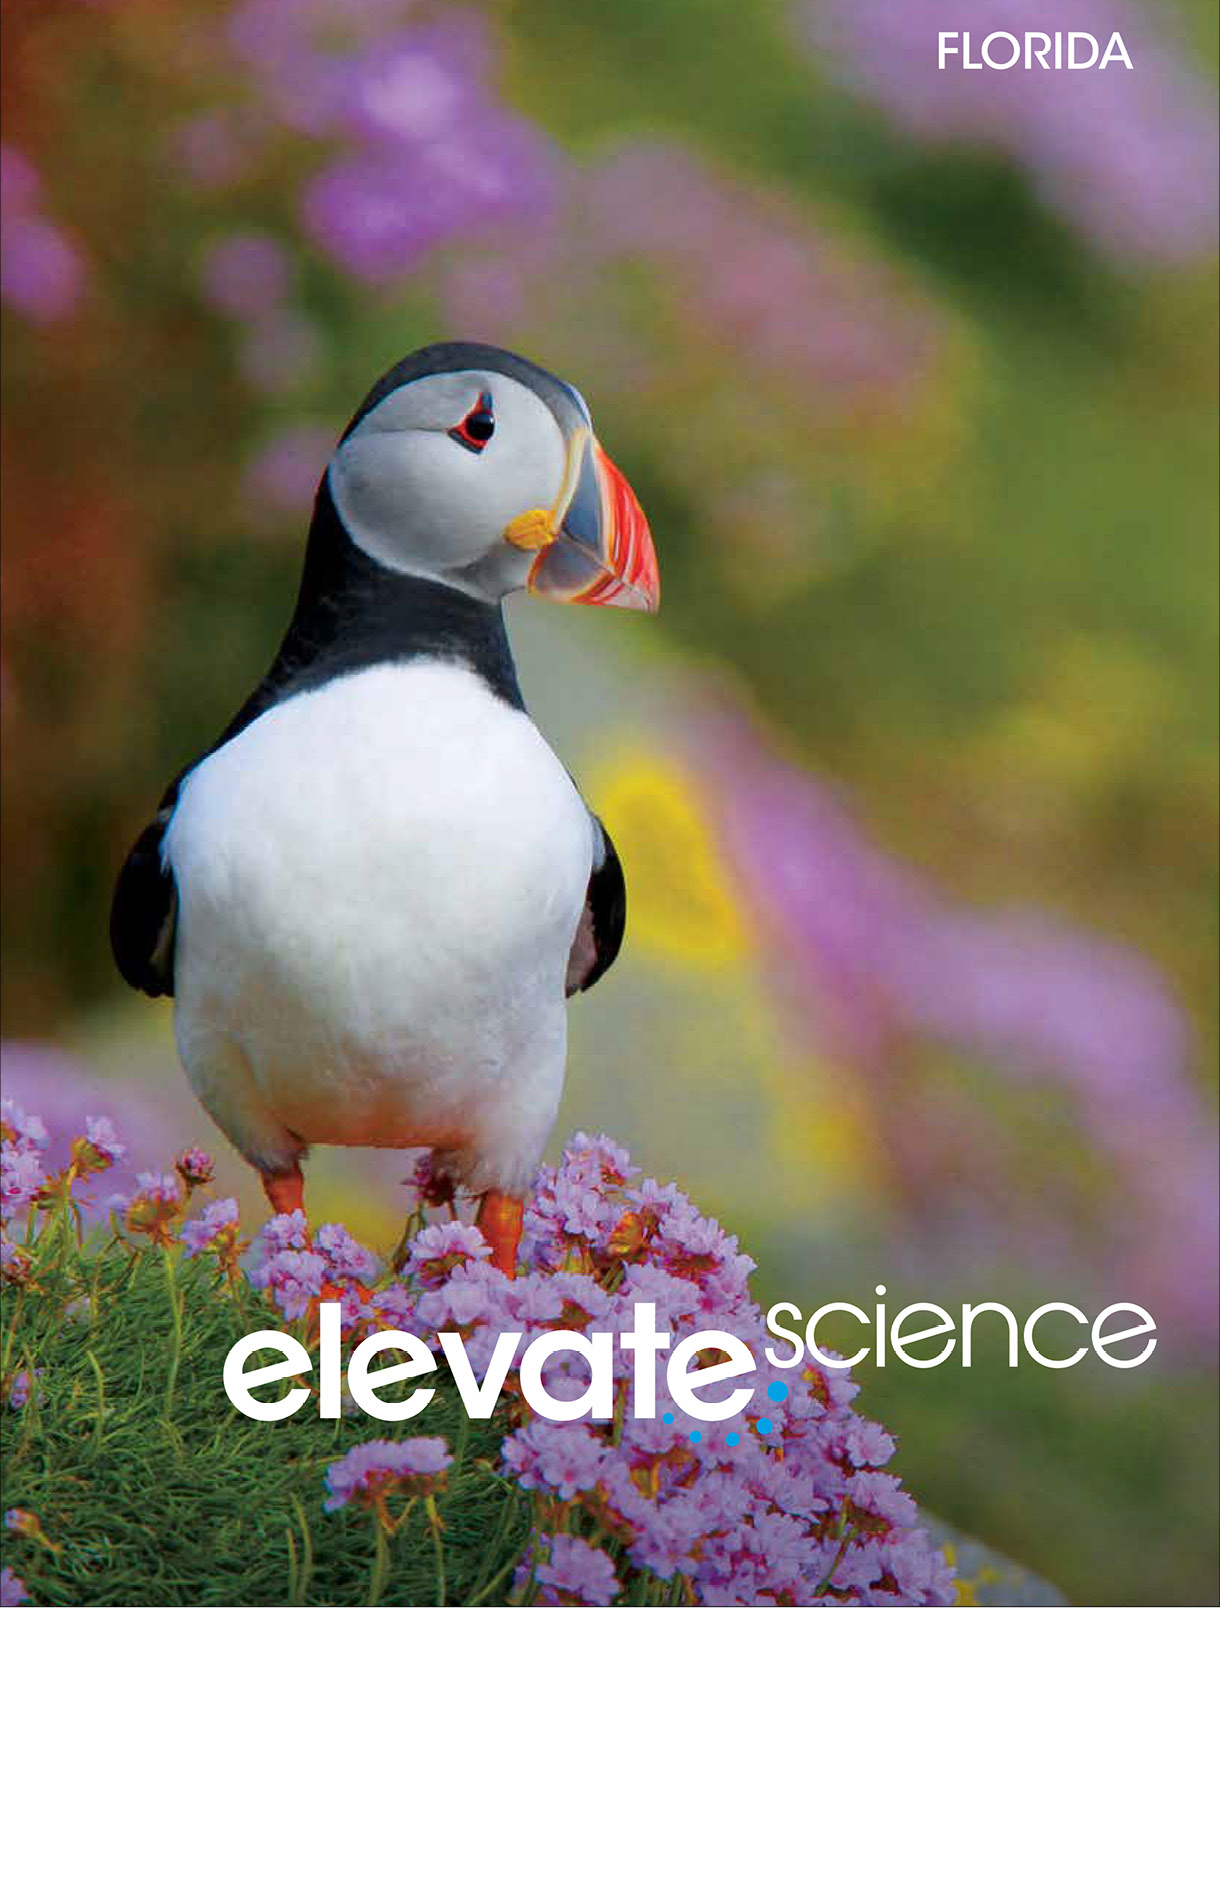 Book cover Elevate Science book. It has an American oystercatcher bird sitting on flowers.